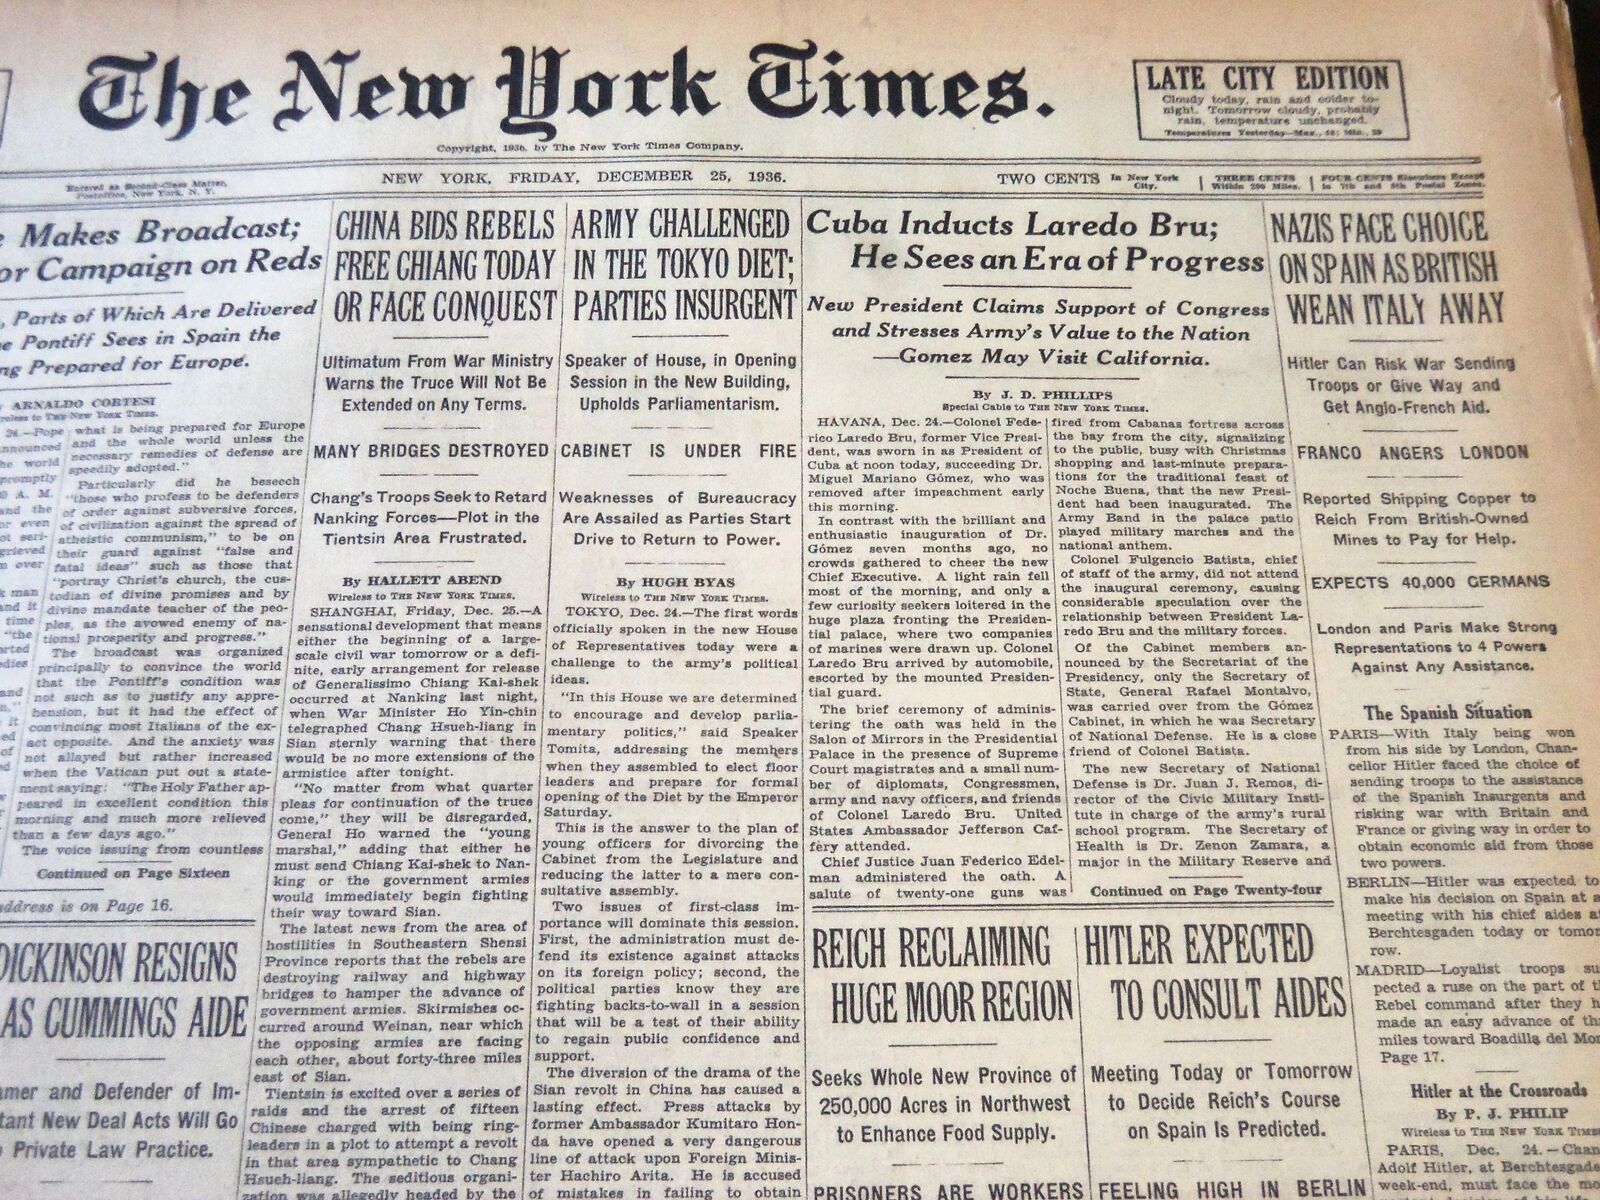 1936 DECEMBER 25 NEW YORK TIMES - CUBE INDUCTS LAREDO BRU - NT 6694